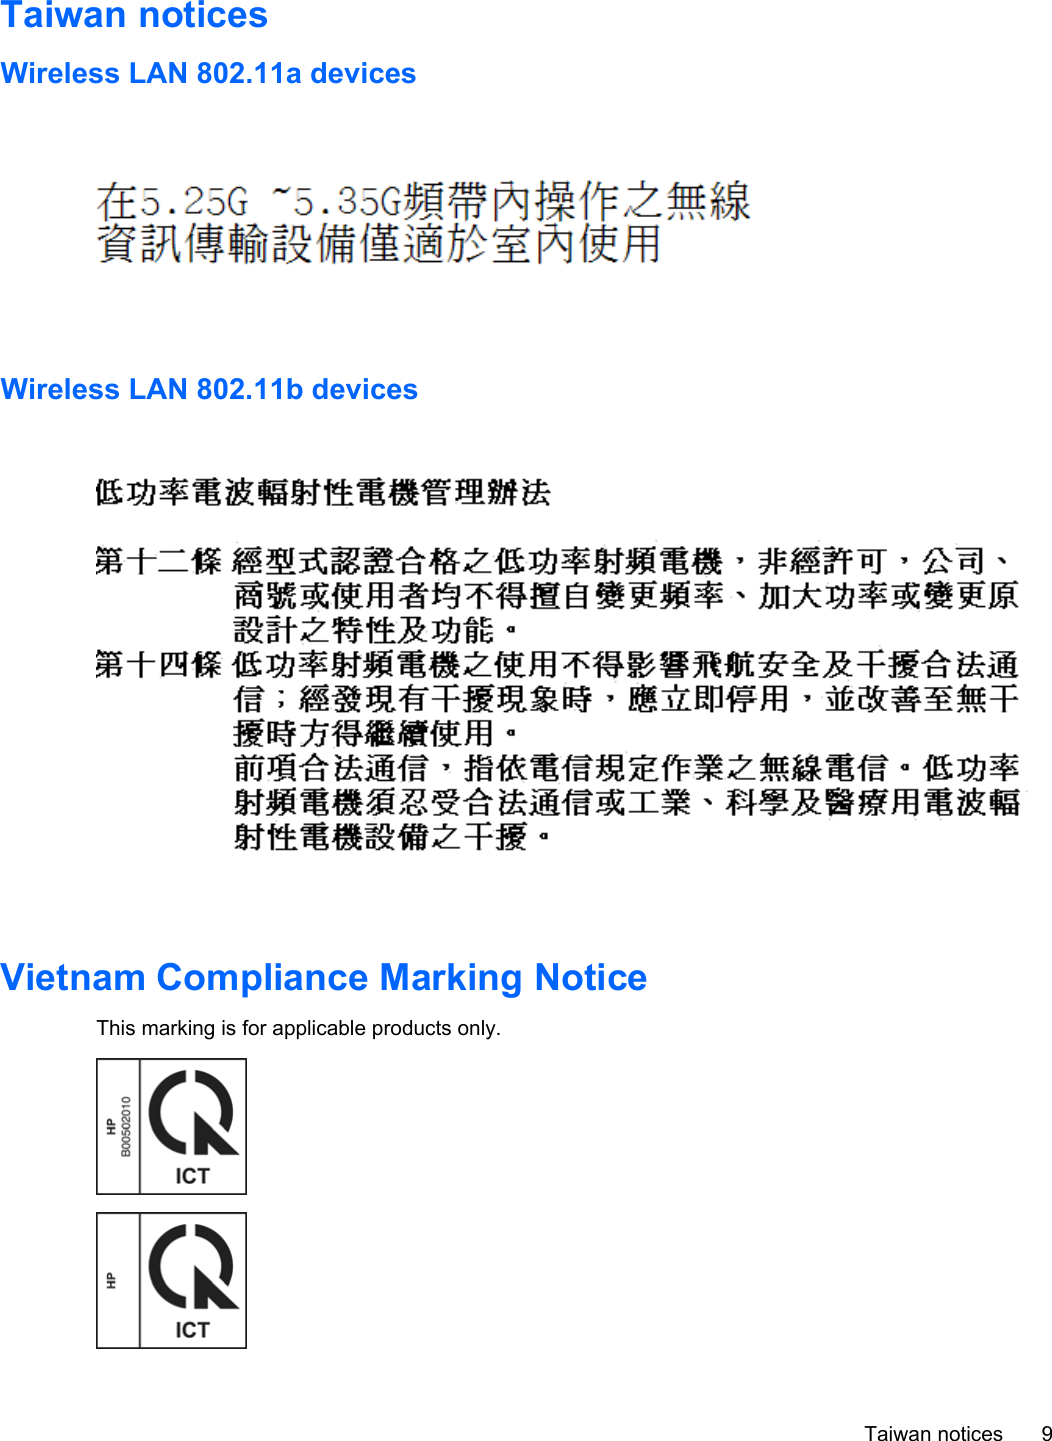 Taiwan noticesWireless LAN 802.11a devicesWireless LAN 802.11b devicesVietnam Compliance Marking NoticeThis marking is for applicable products only.Taiwan notices 9